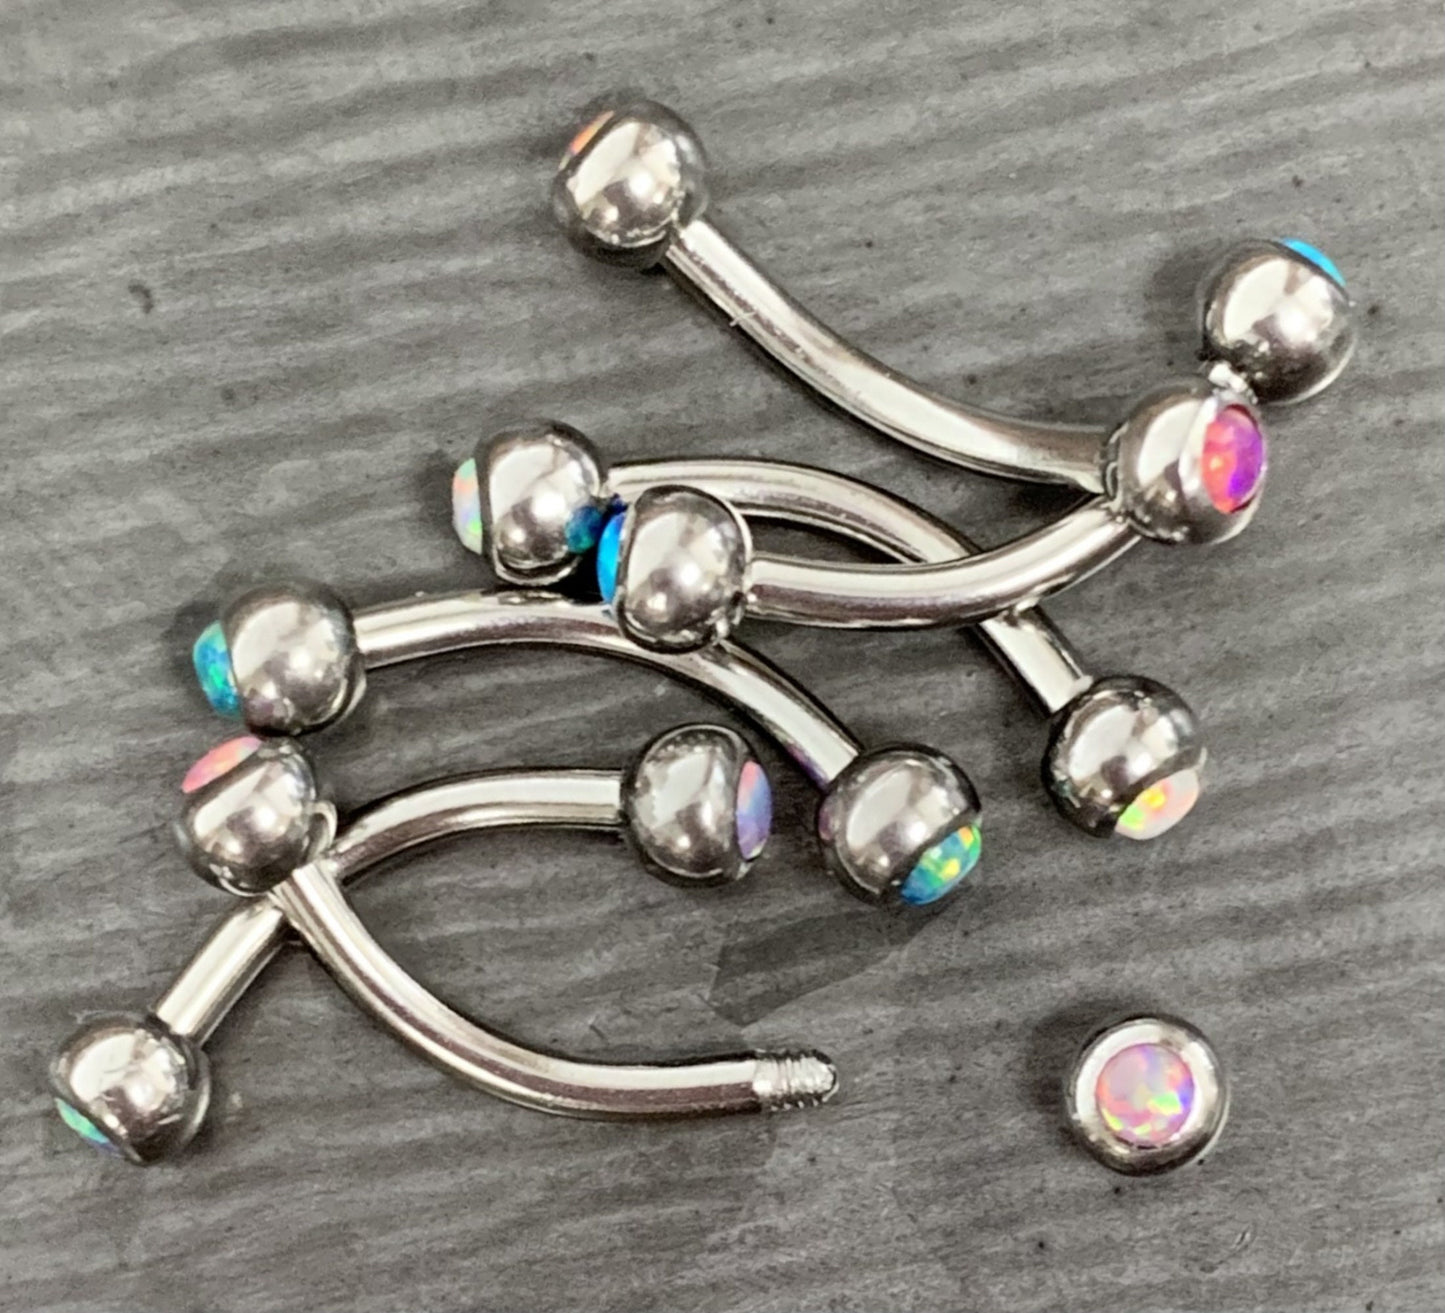 1 Piece Double Opal Curved Barbell Eyebrow Ring - 16g - Length 8mm - White, Blue, Green, Fuchsia, Pink and Purple Available!